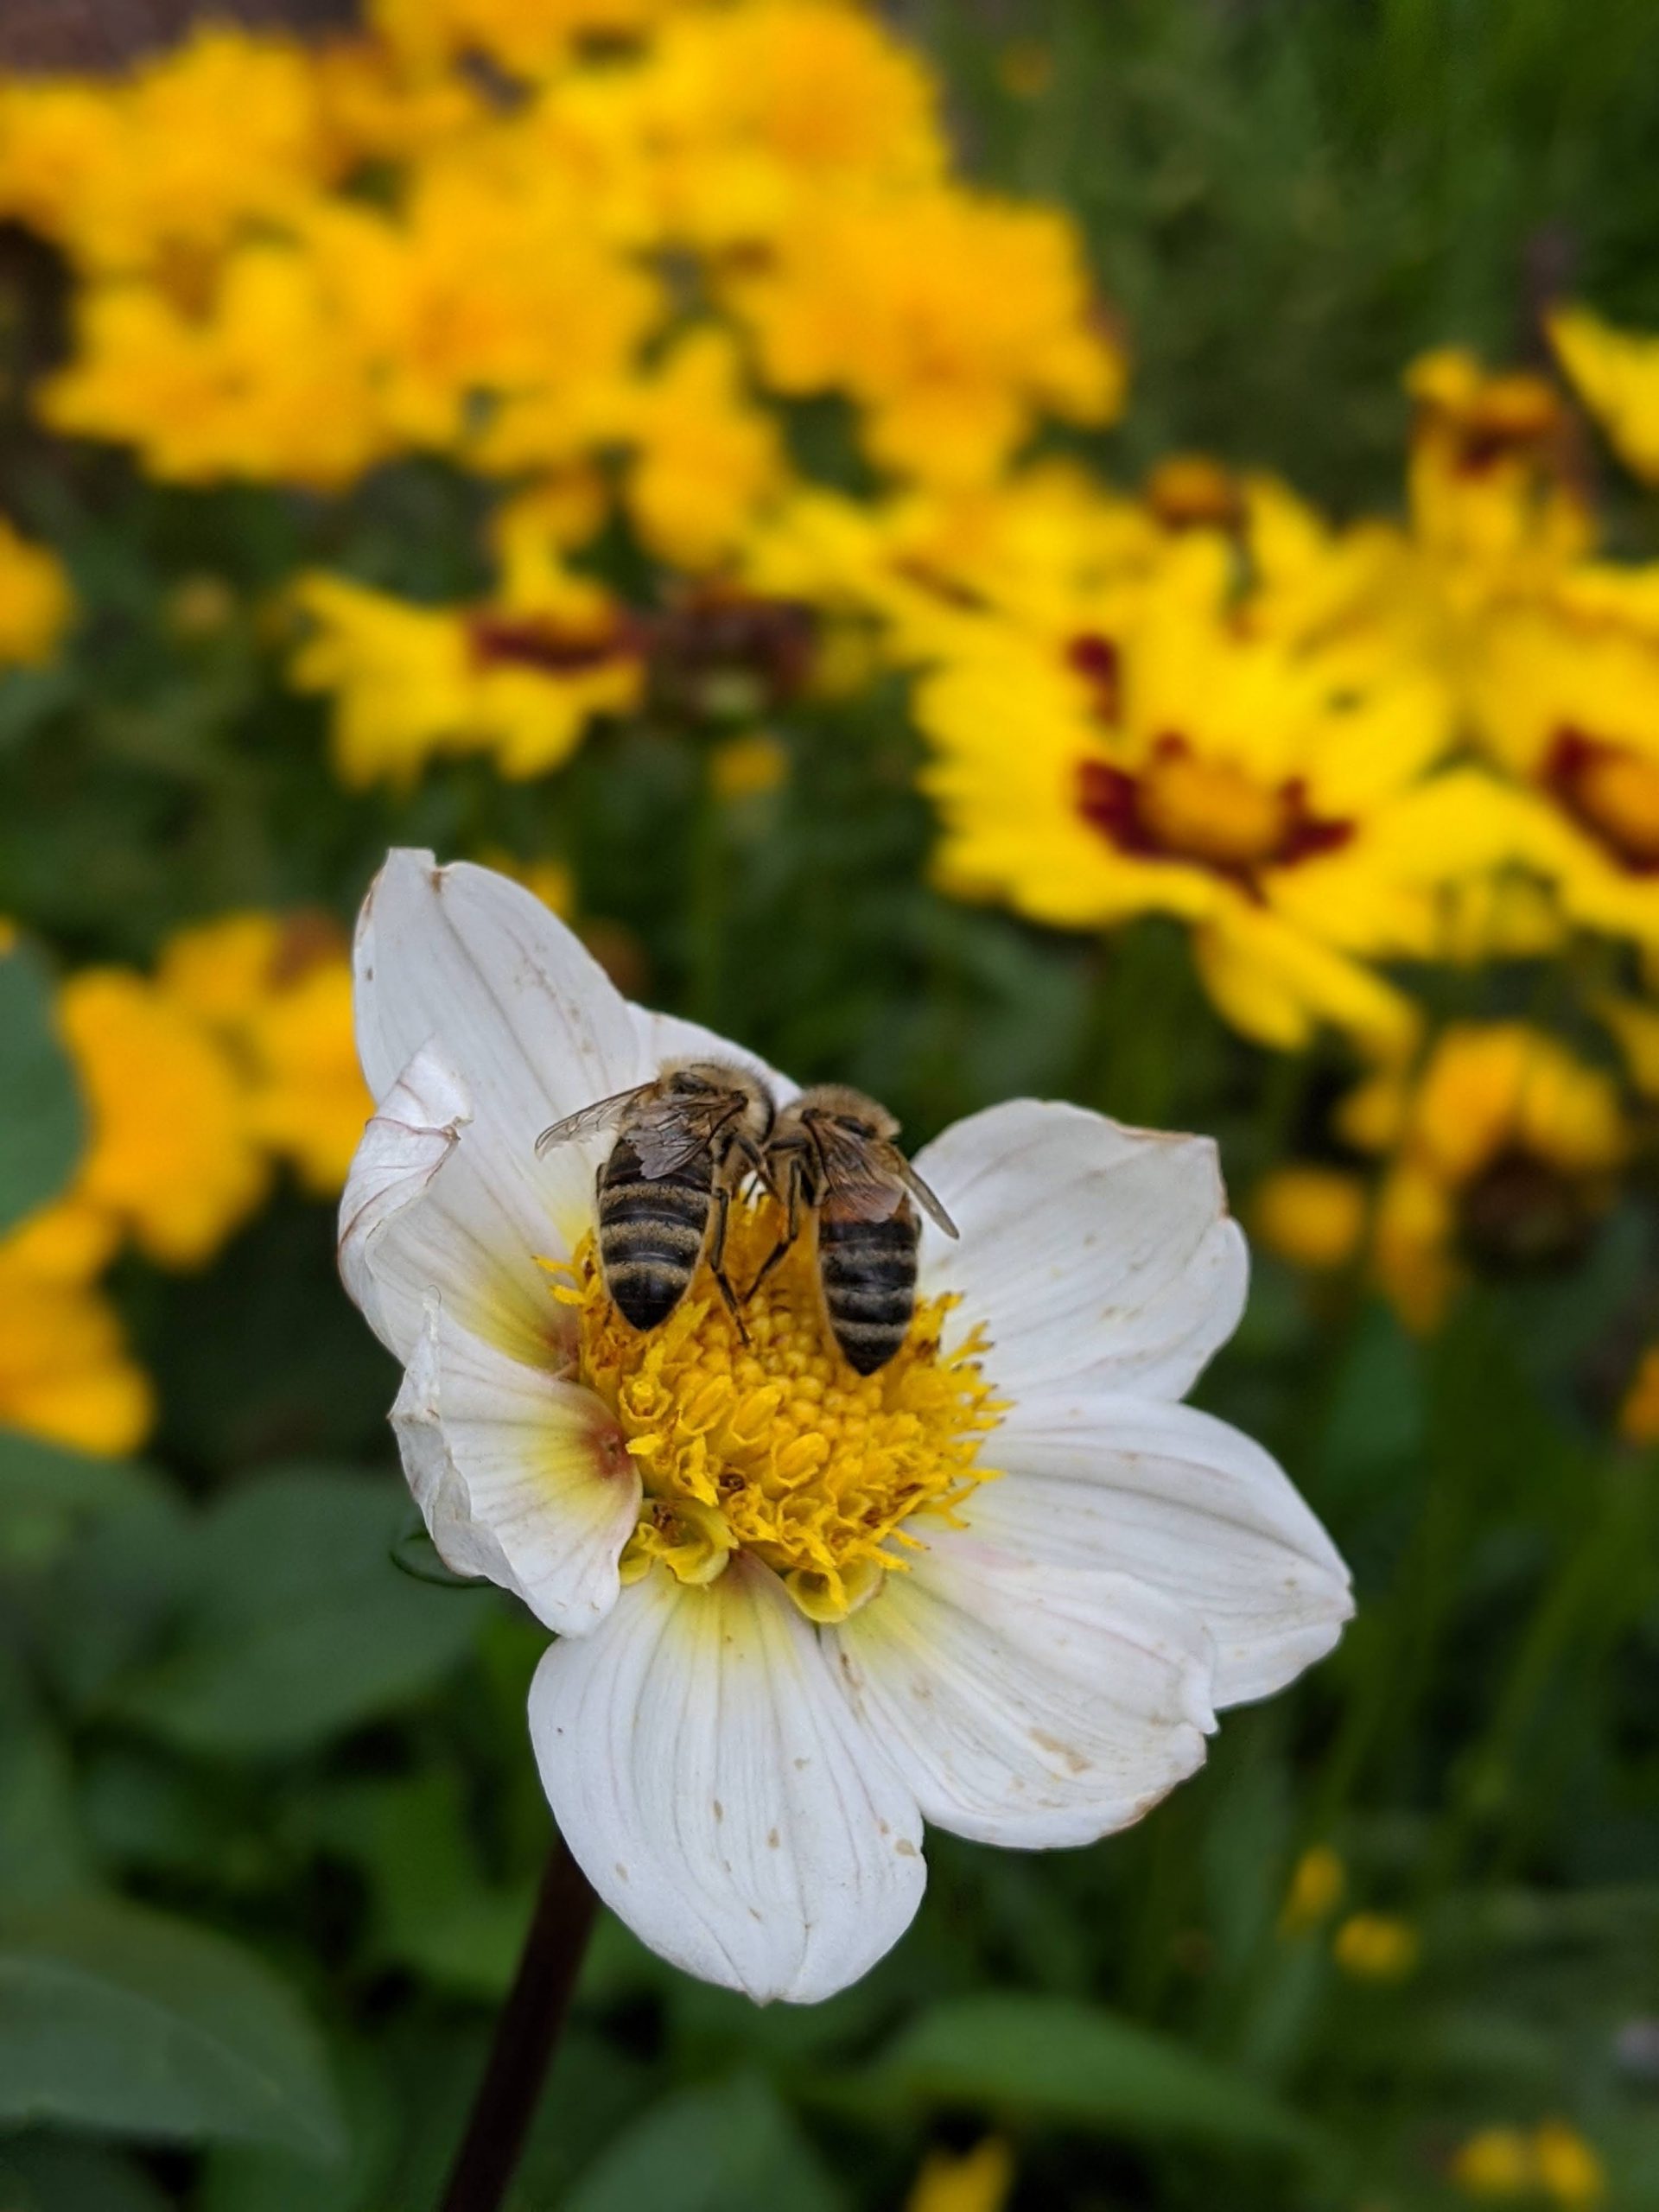 Two bees foraging on a flower